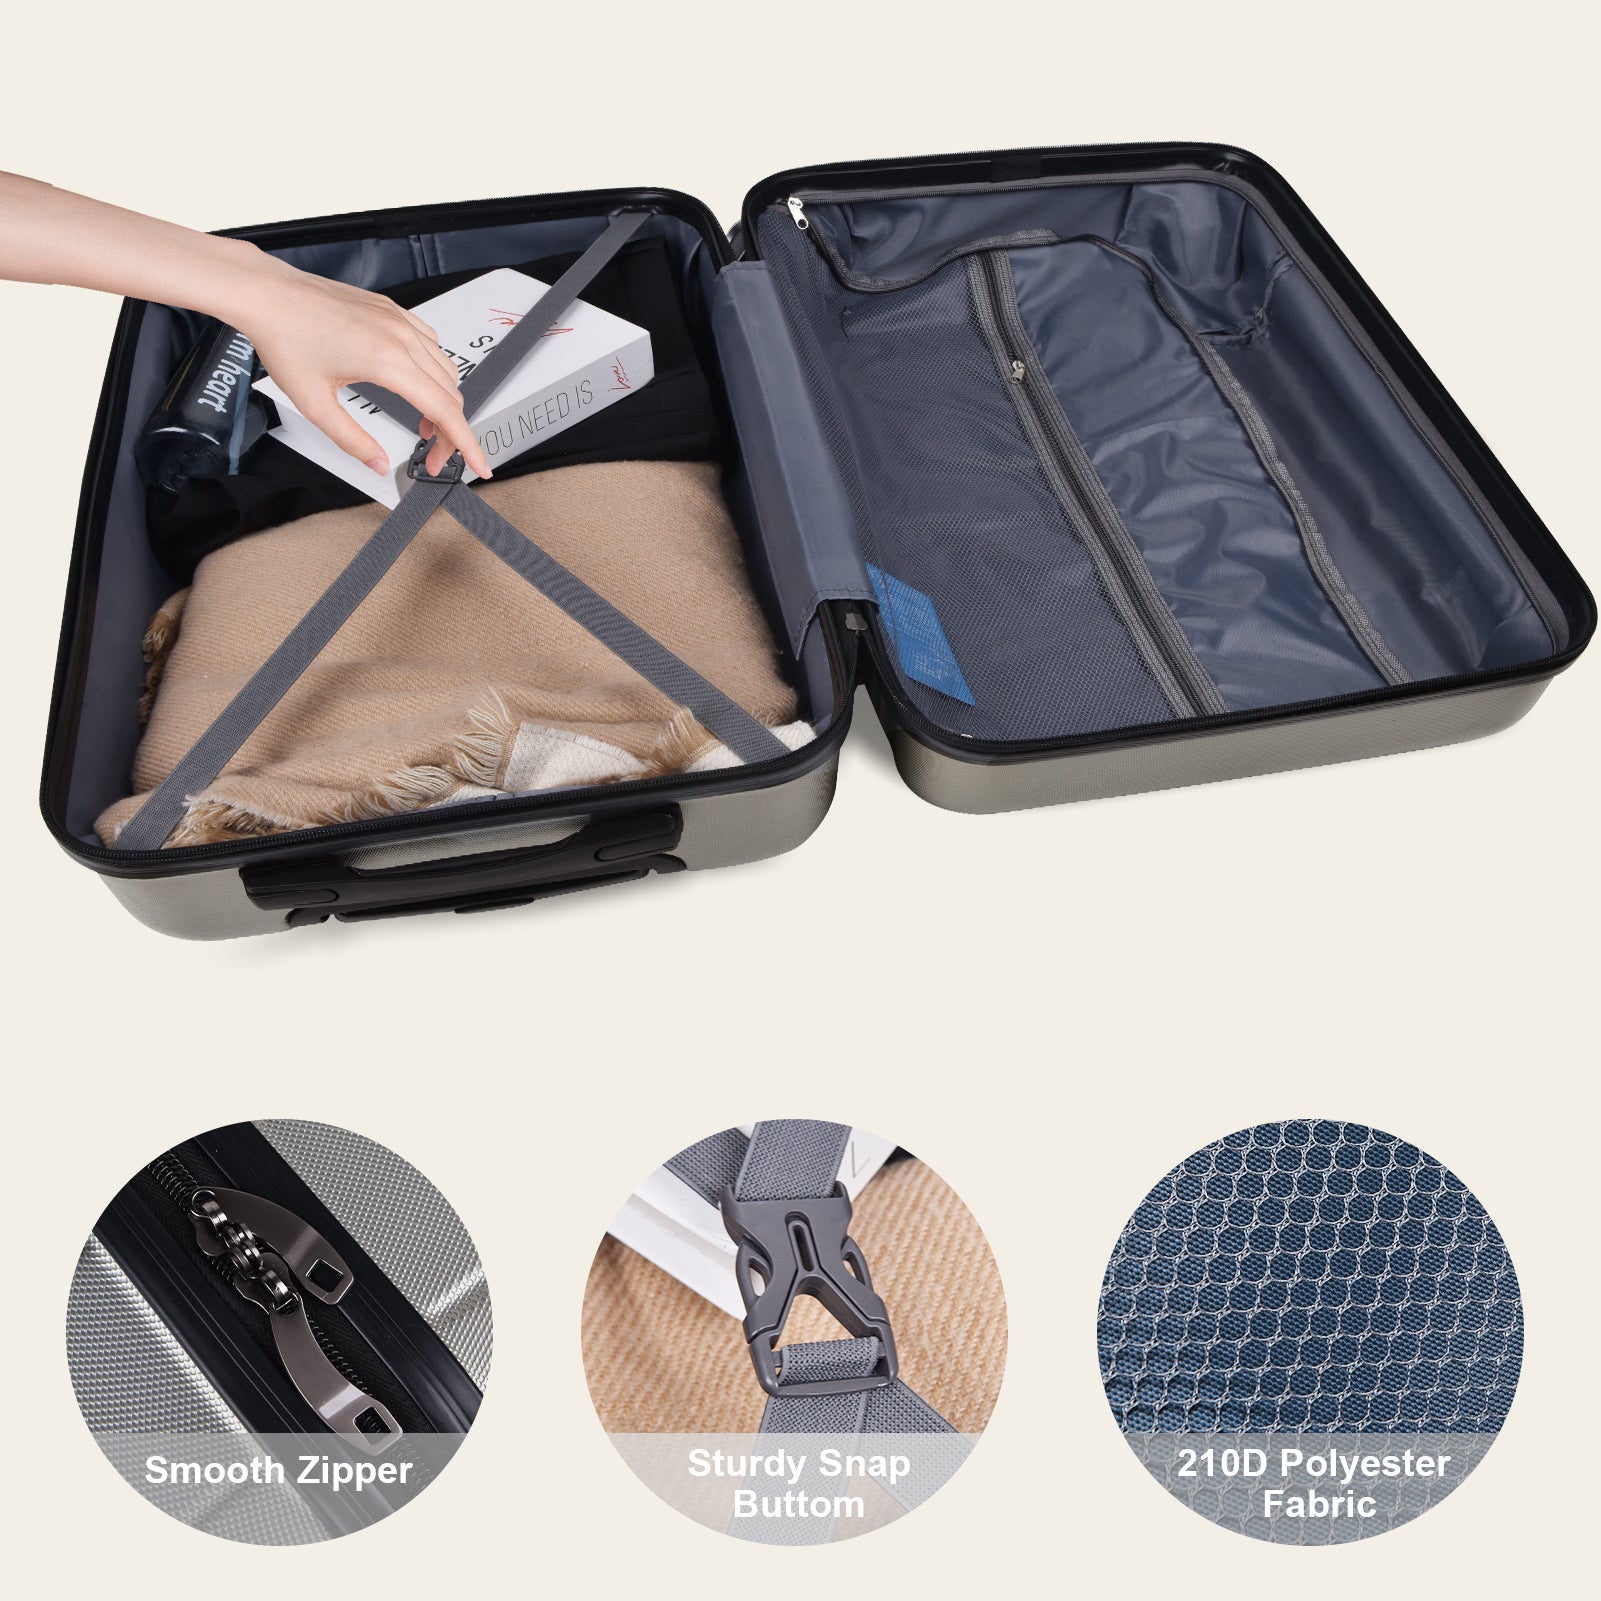 Luggage Suitcase 3 Piece Sets Hardside Carry on cement grey-abs